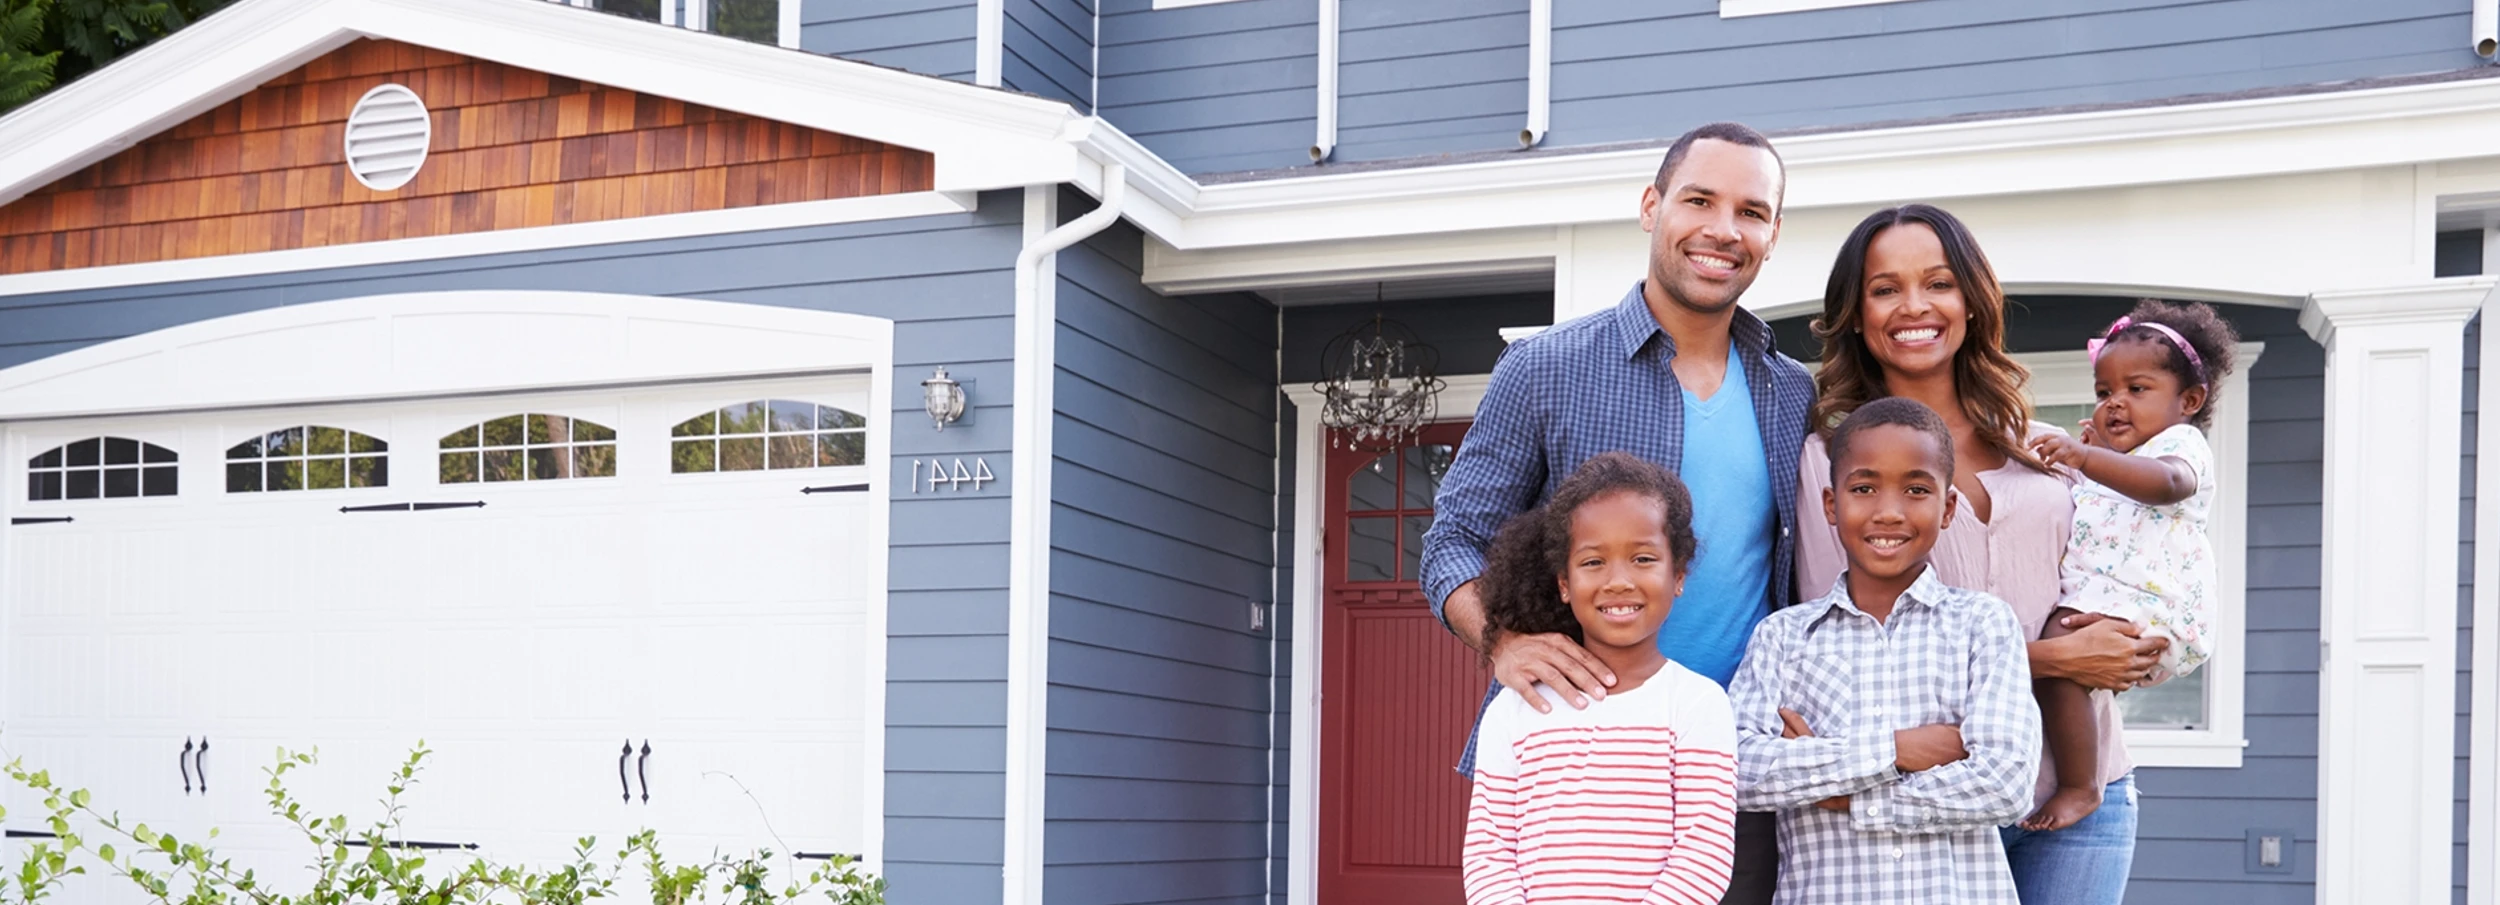 Young African American family smiling in front of two story home with garage.